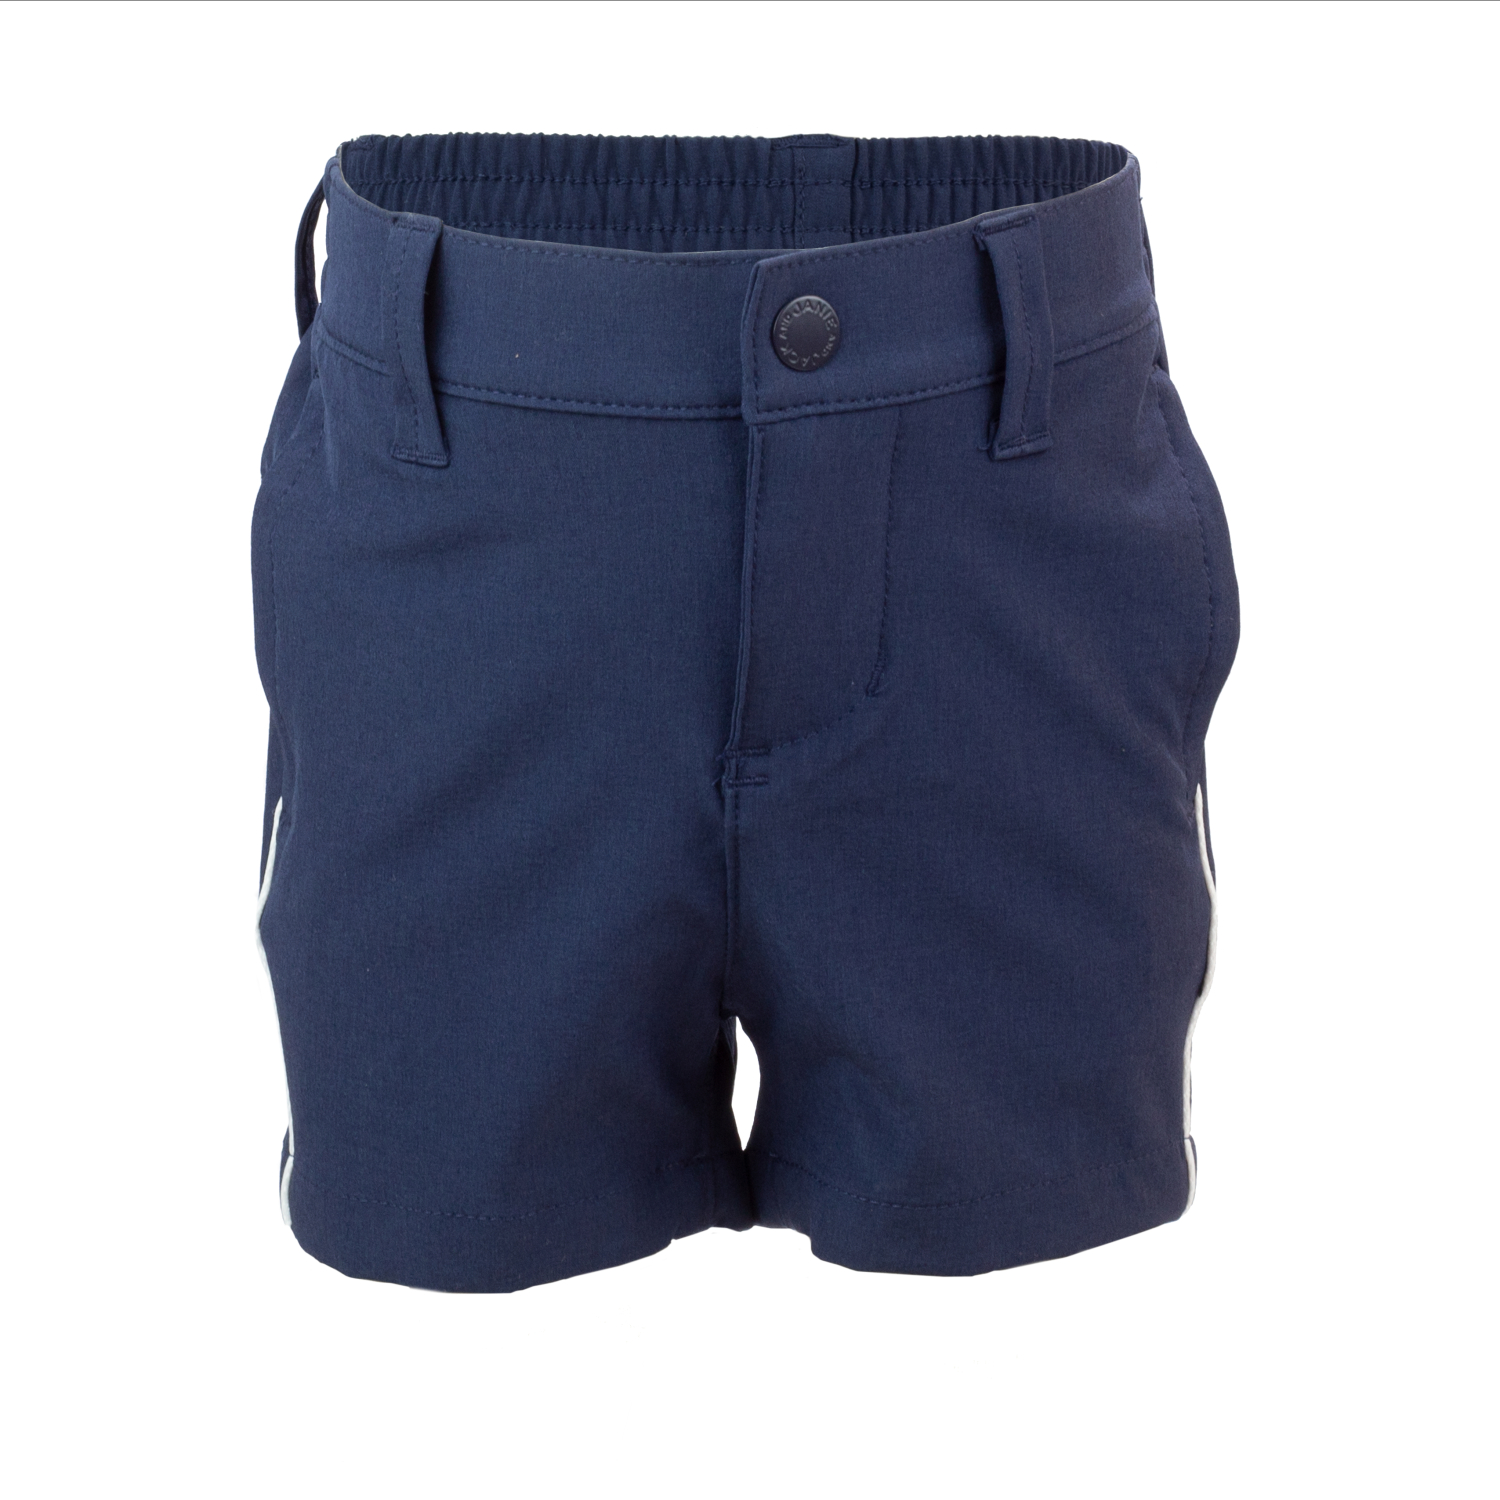 Janie and Jack Boy's Navy Tech Short 18-24 Months 